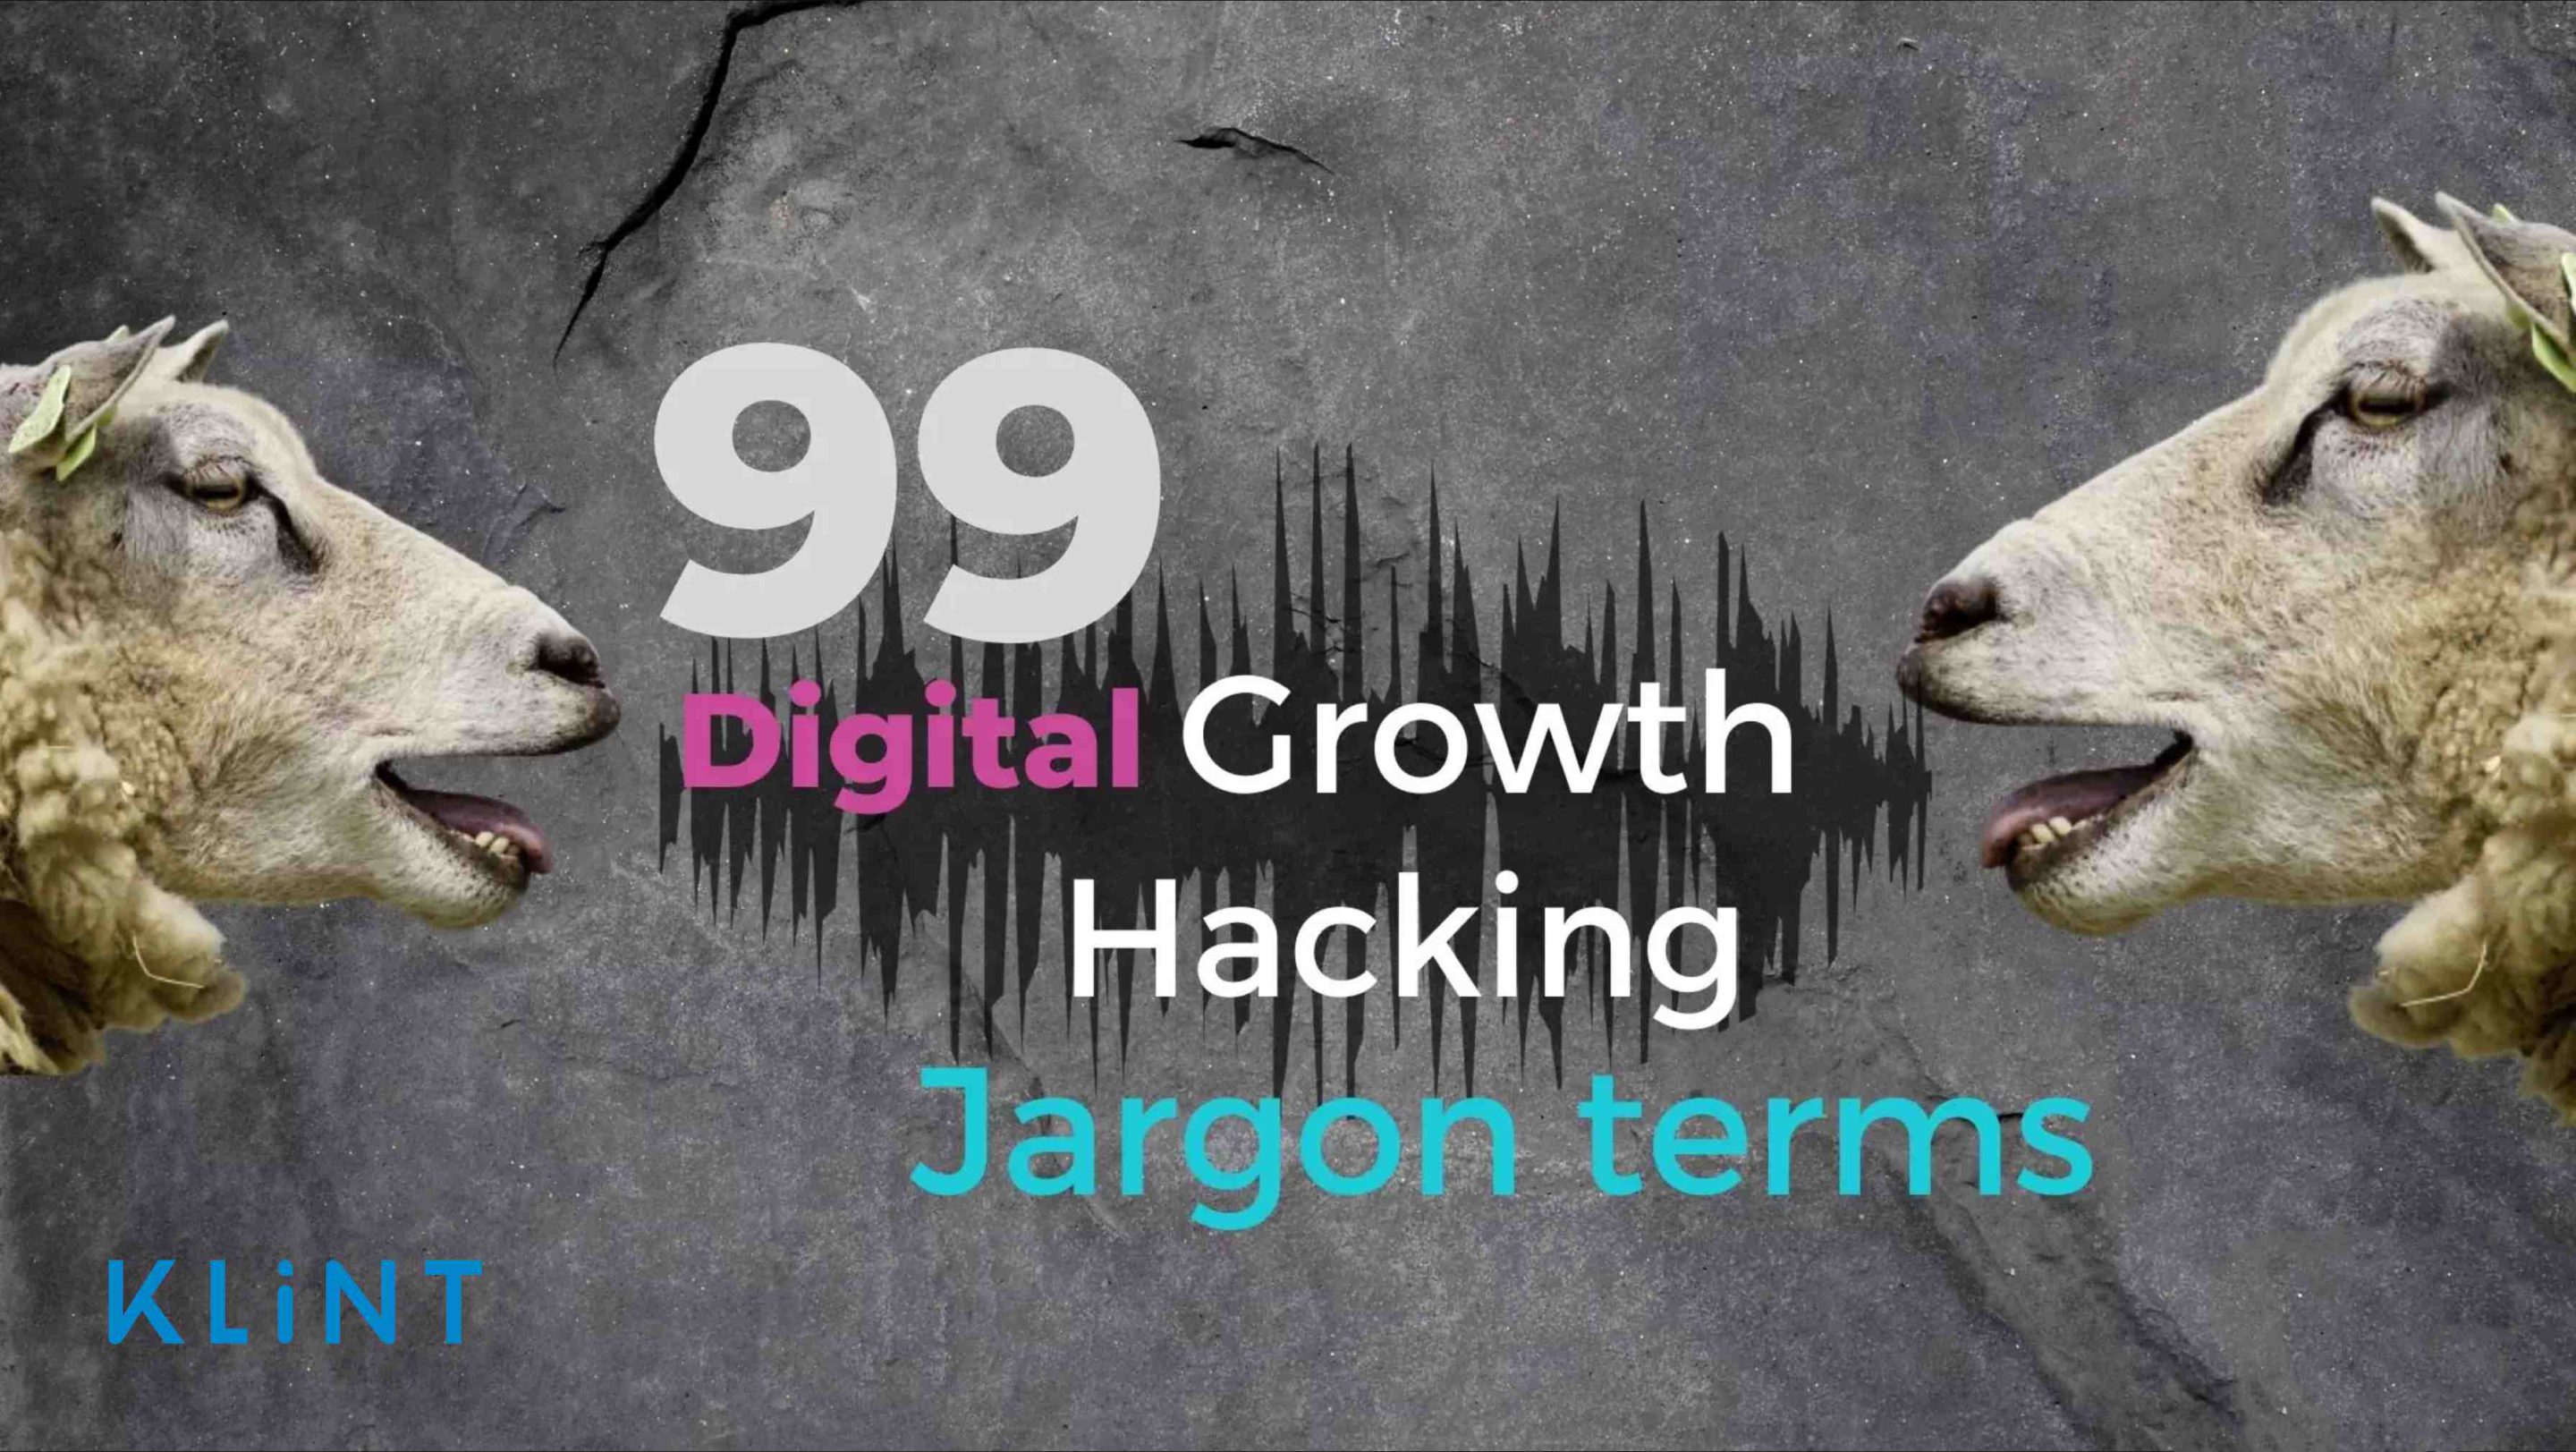 2 sheep bleating , a sound wave coming out of their mouths. Text overlaid: "growth hacking jargon terms"